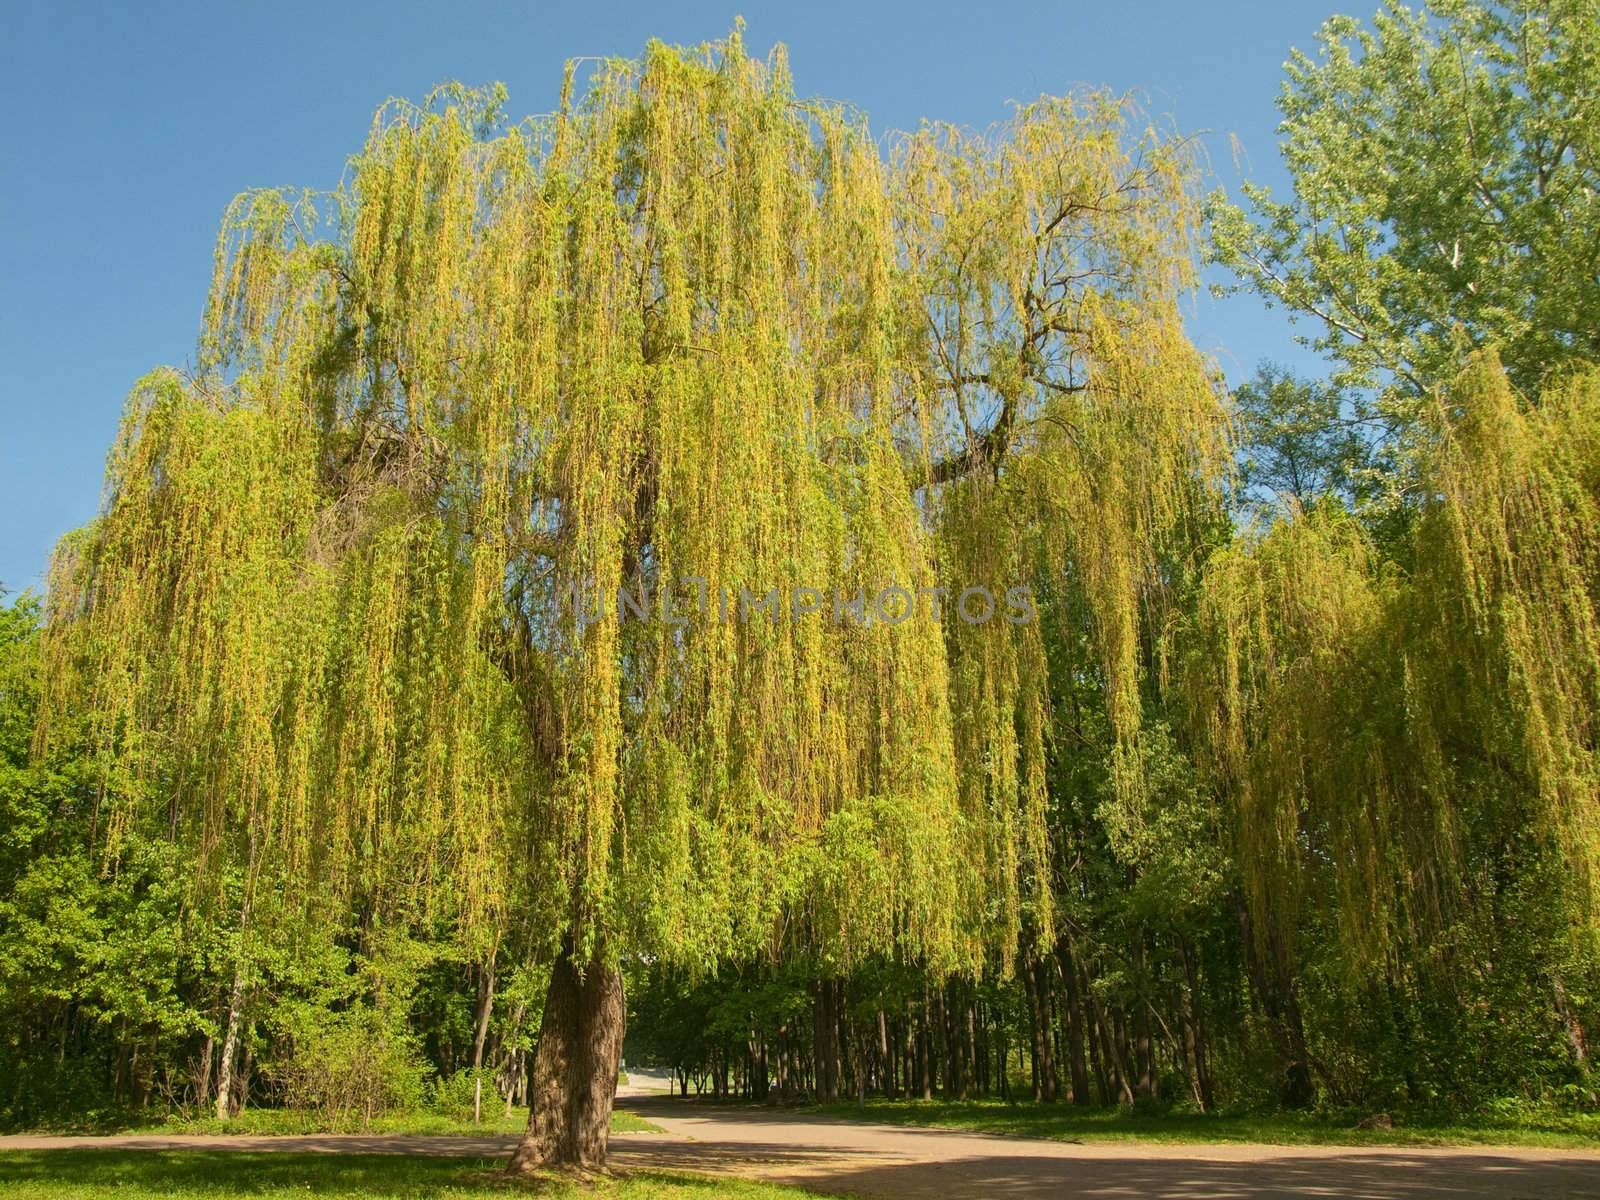 Willow tree in a city park 